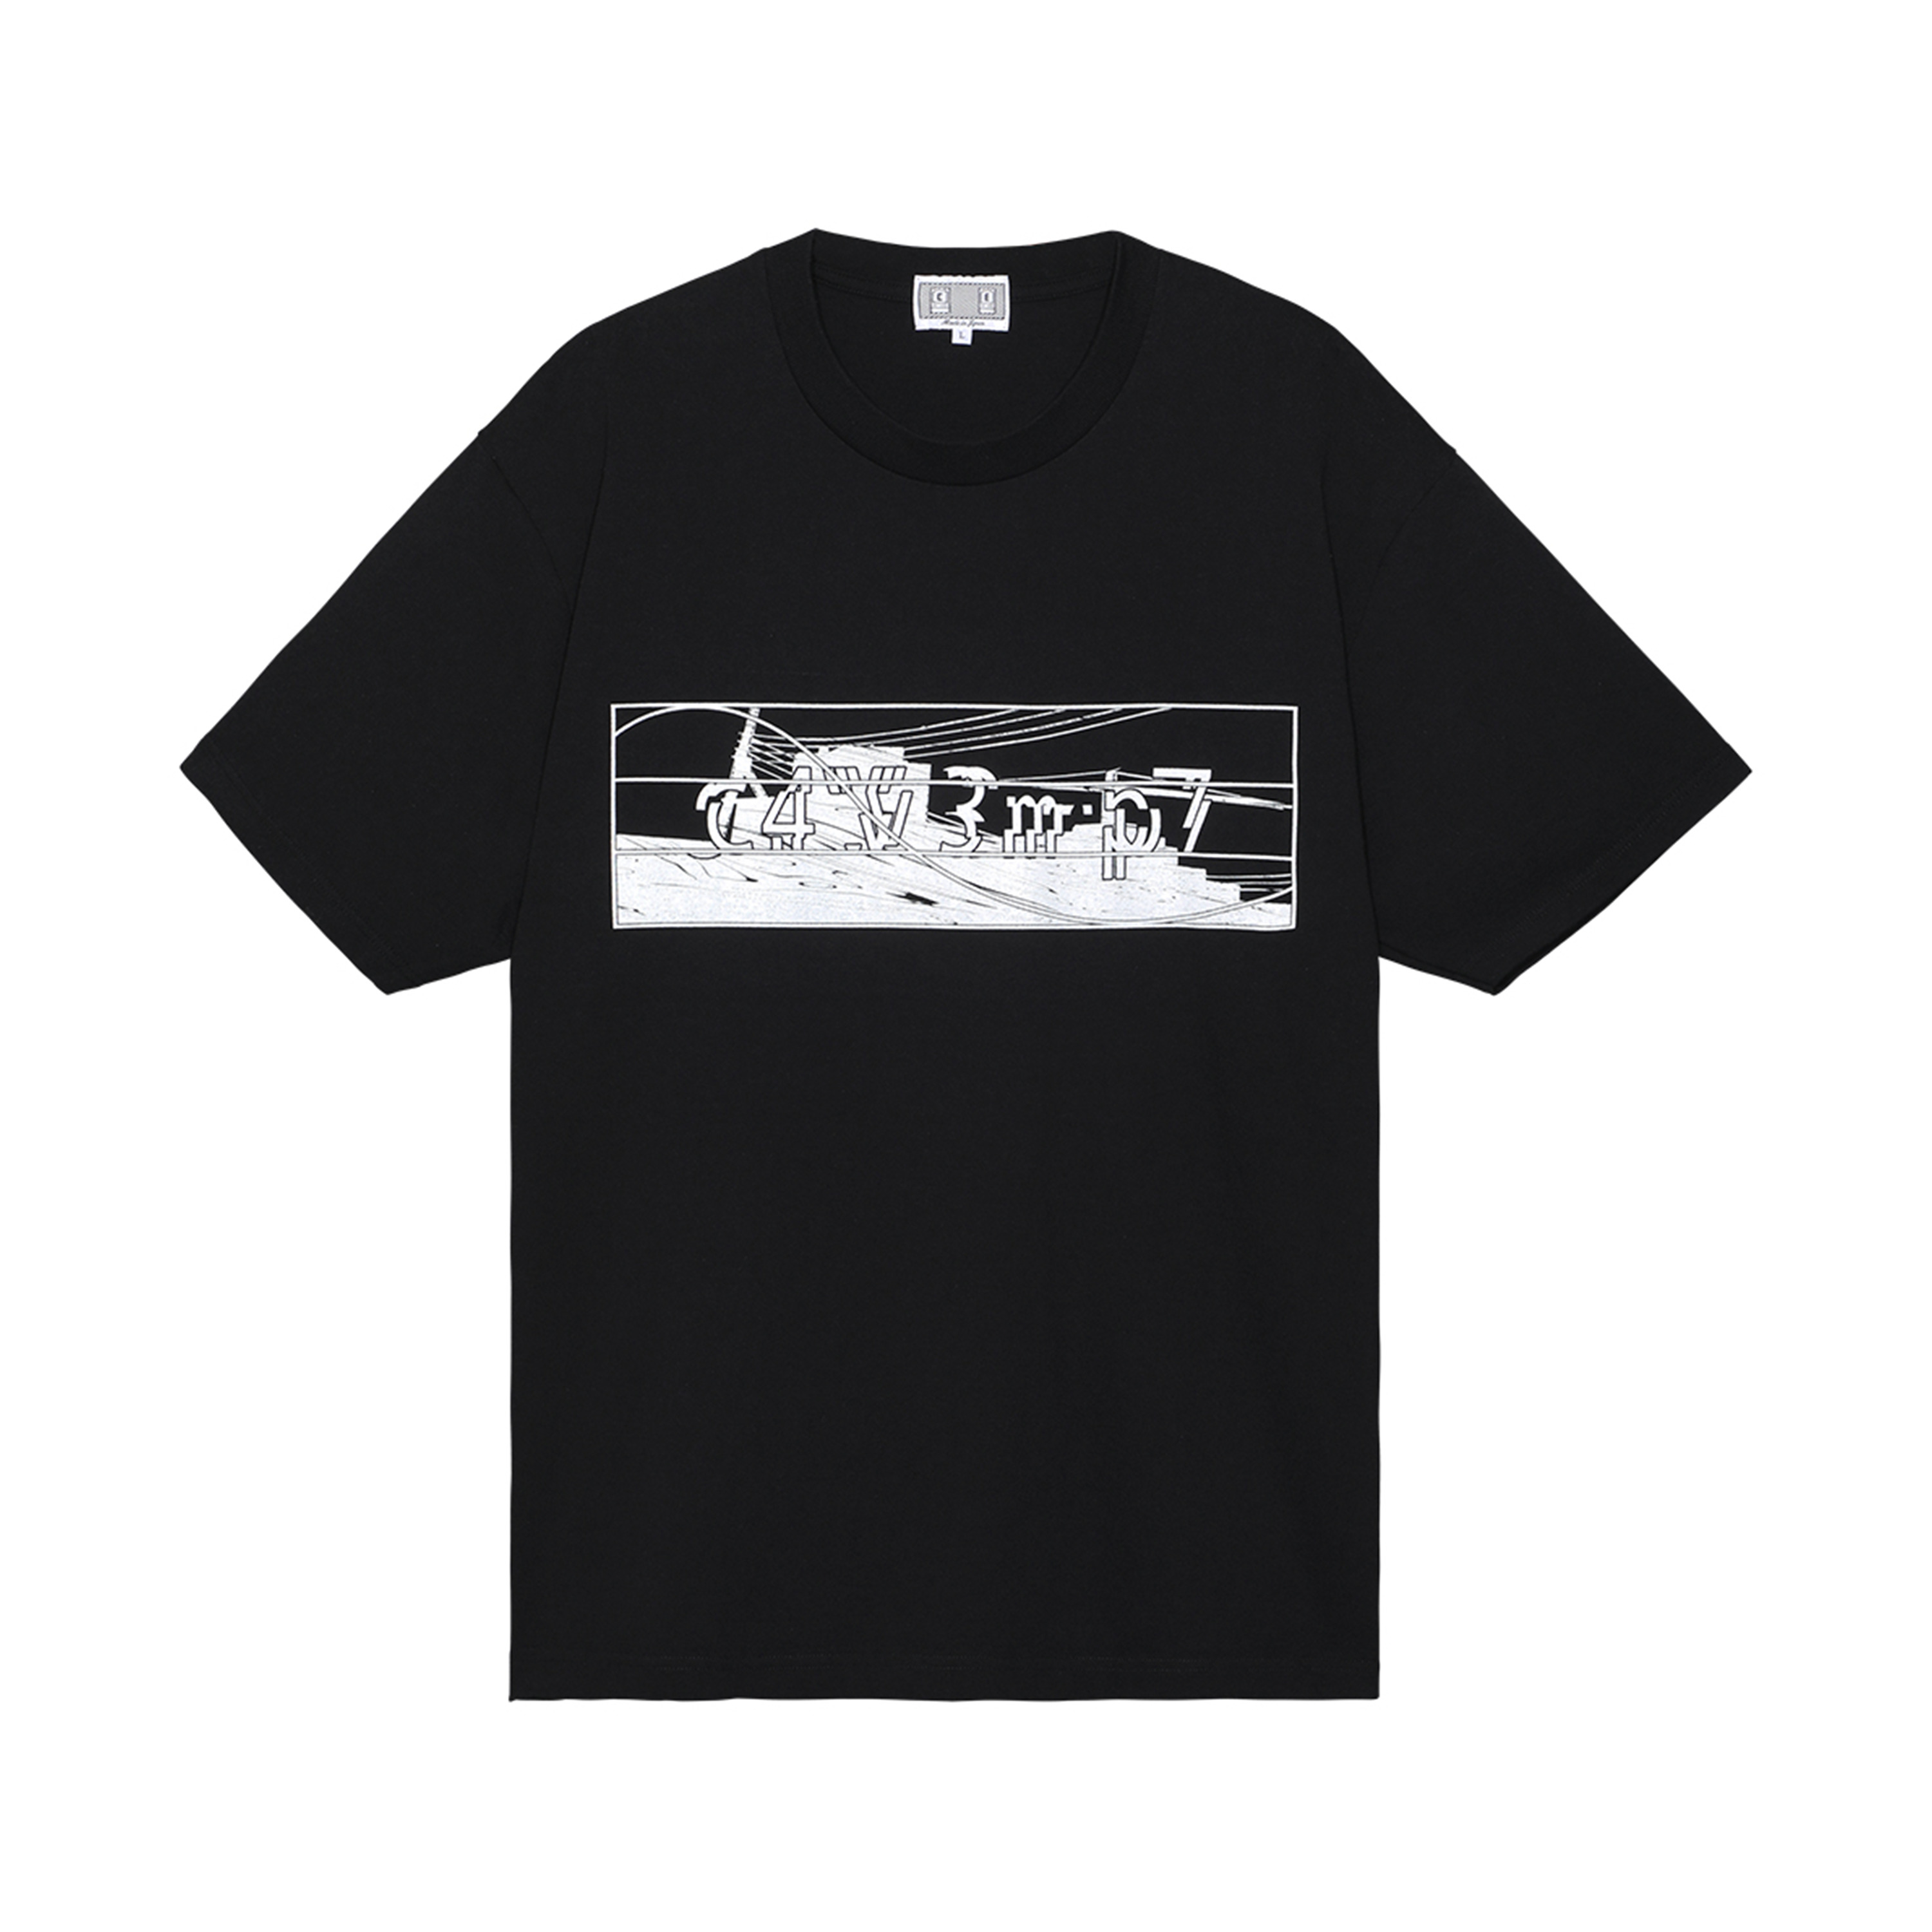 MARKS OF THE END T-SHIRT BLACK - 1